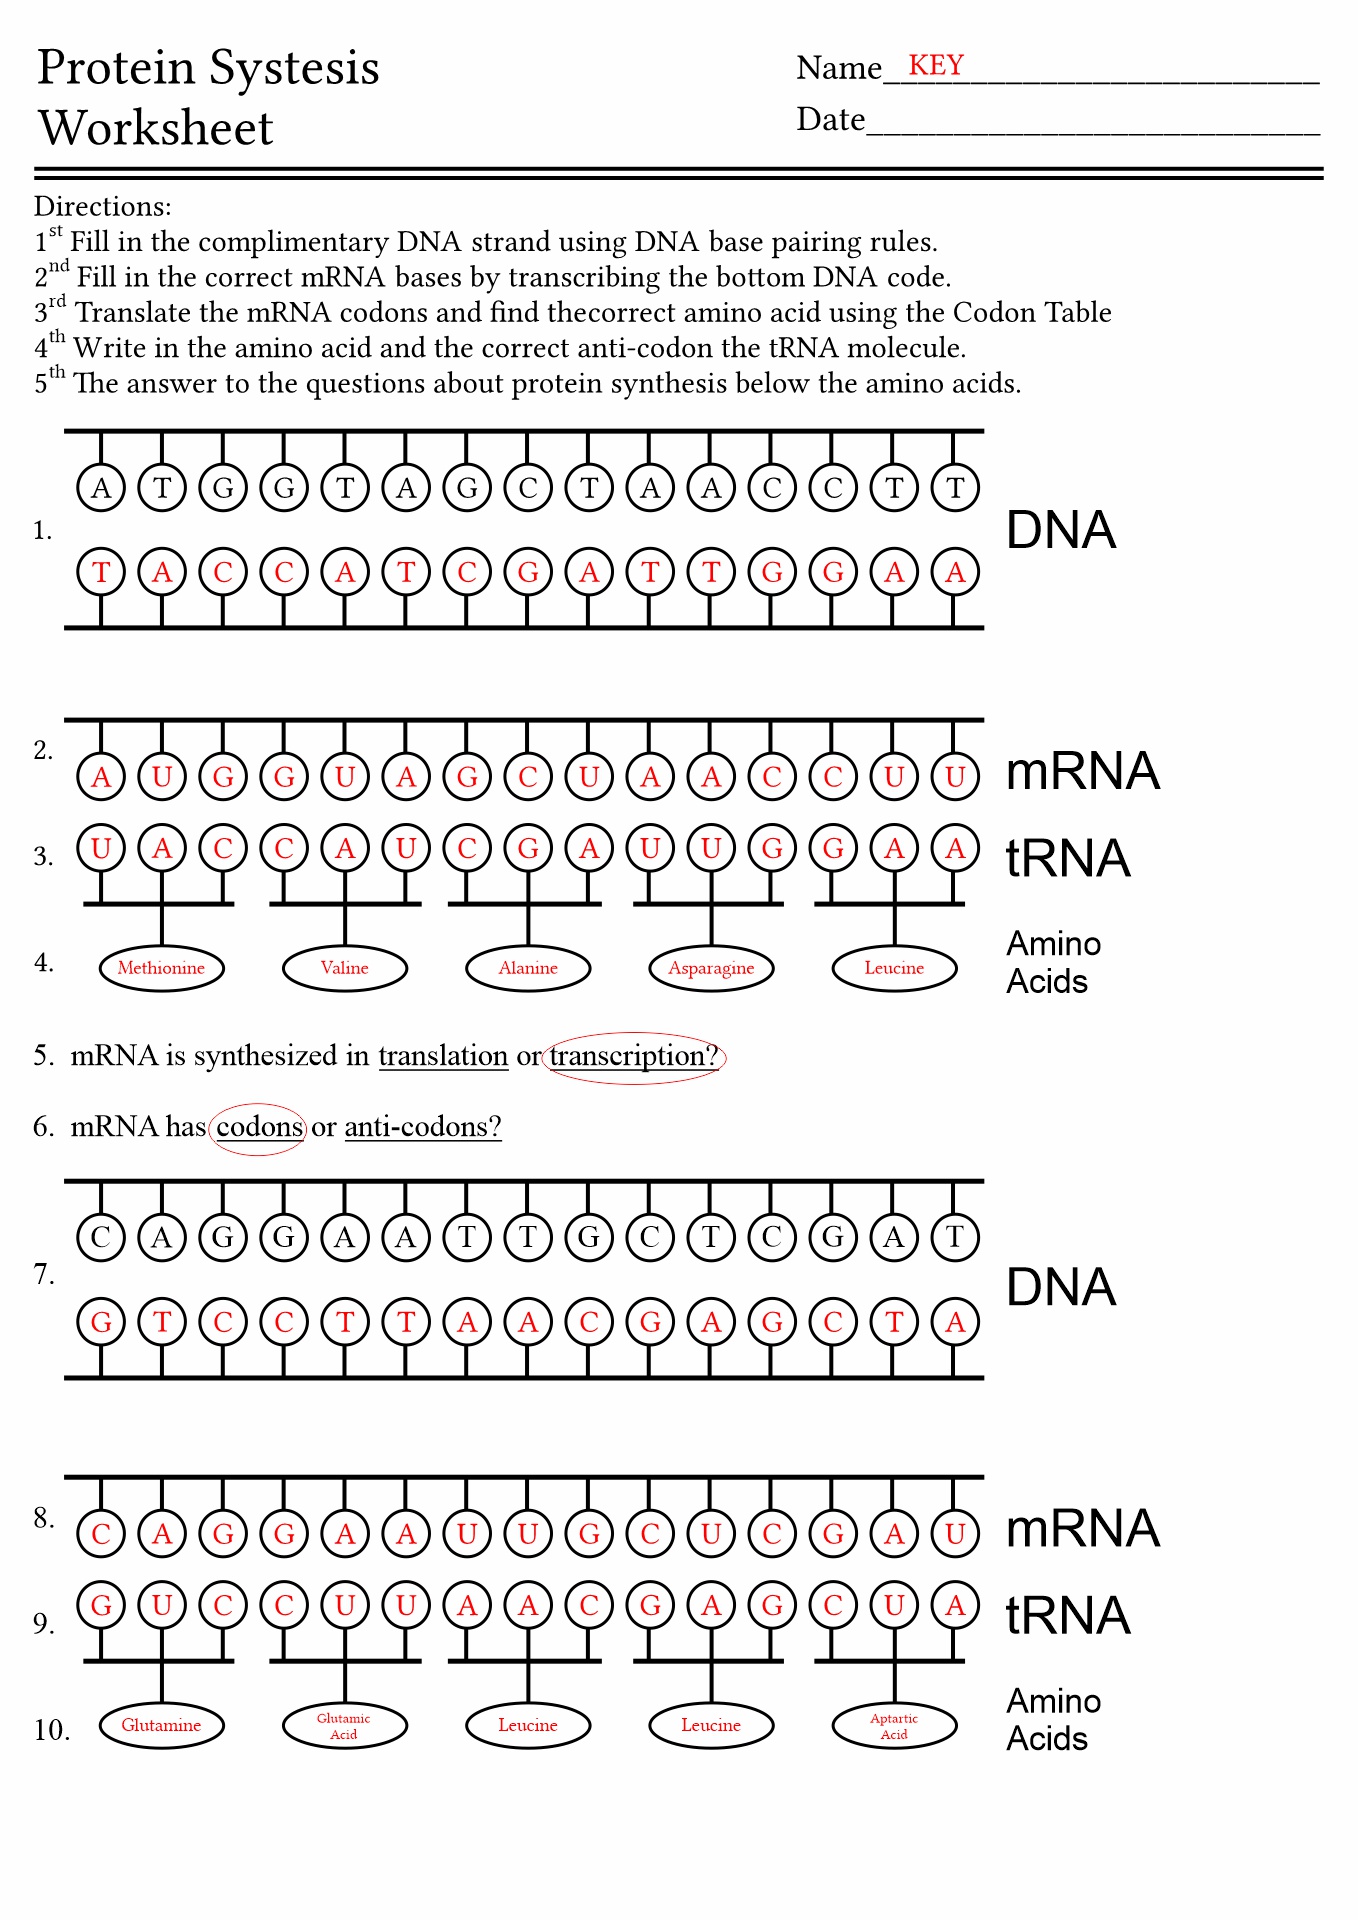 13-best-images-of-dna-code-worksheet-protein-synthesis-worksheet